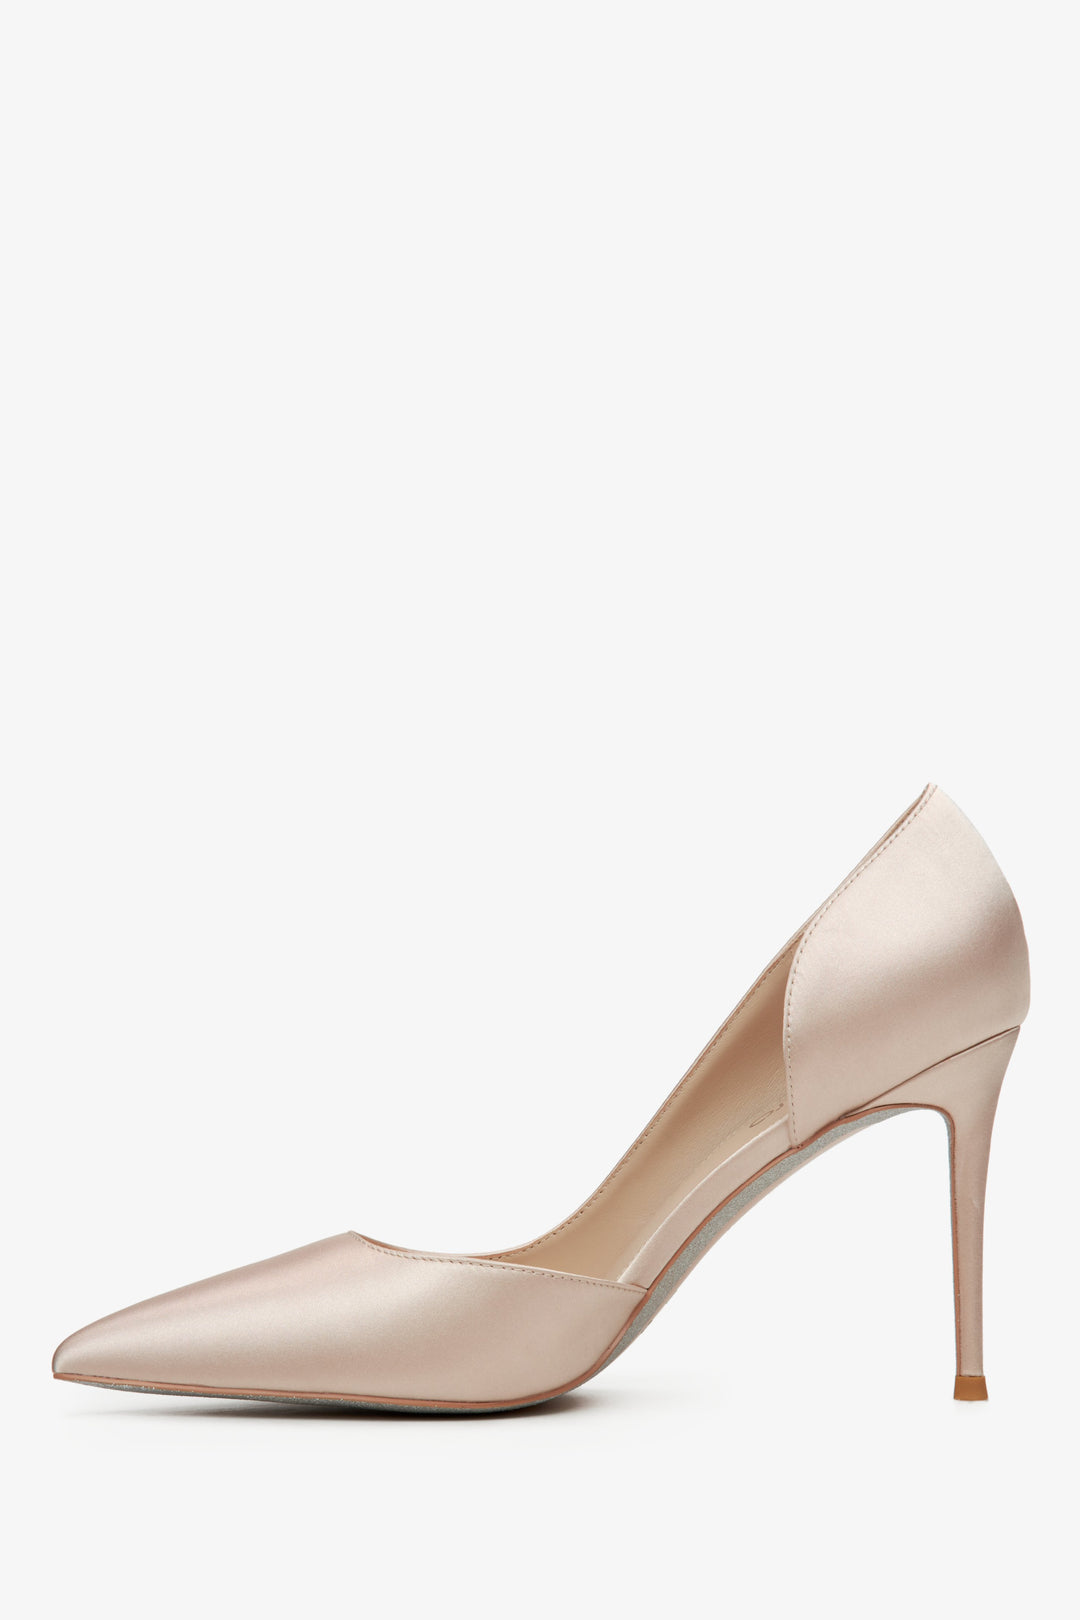 Women's powder pink Estro high heels with a satin finish - shoe profile.